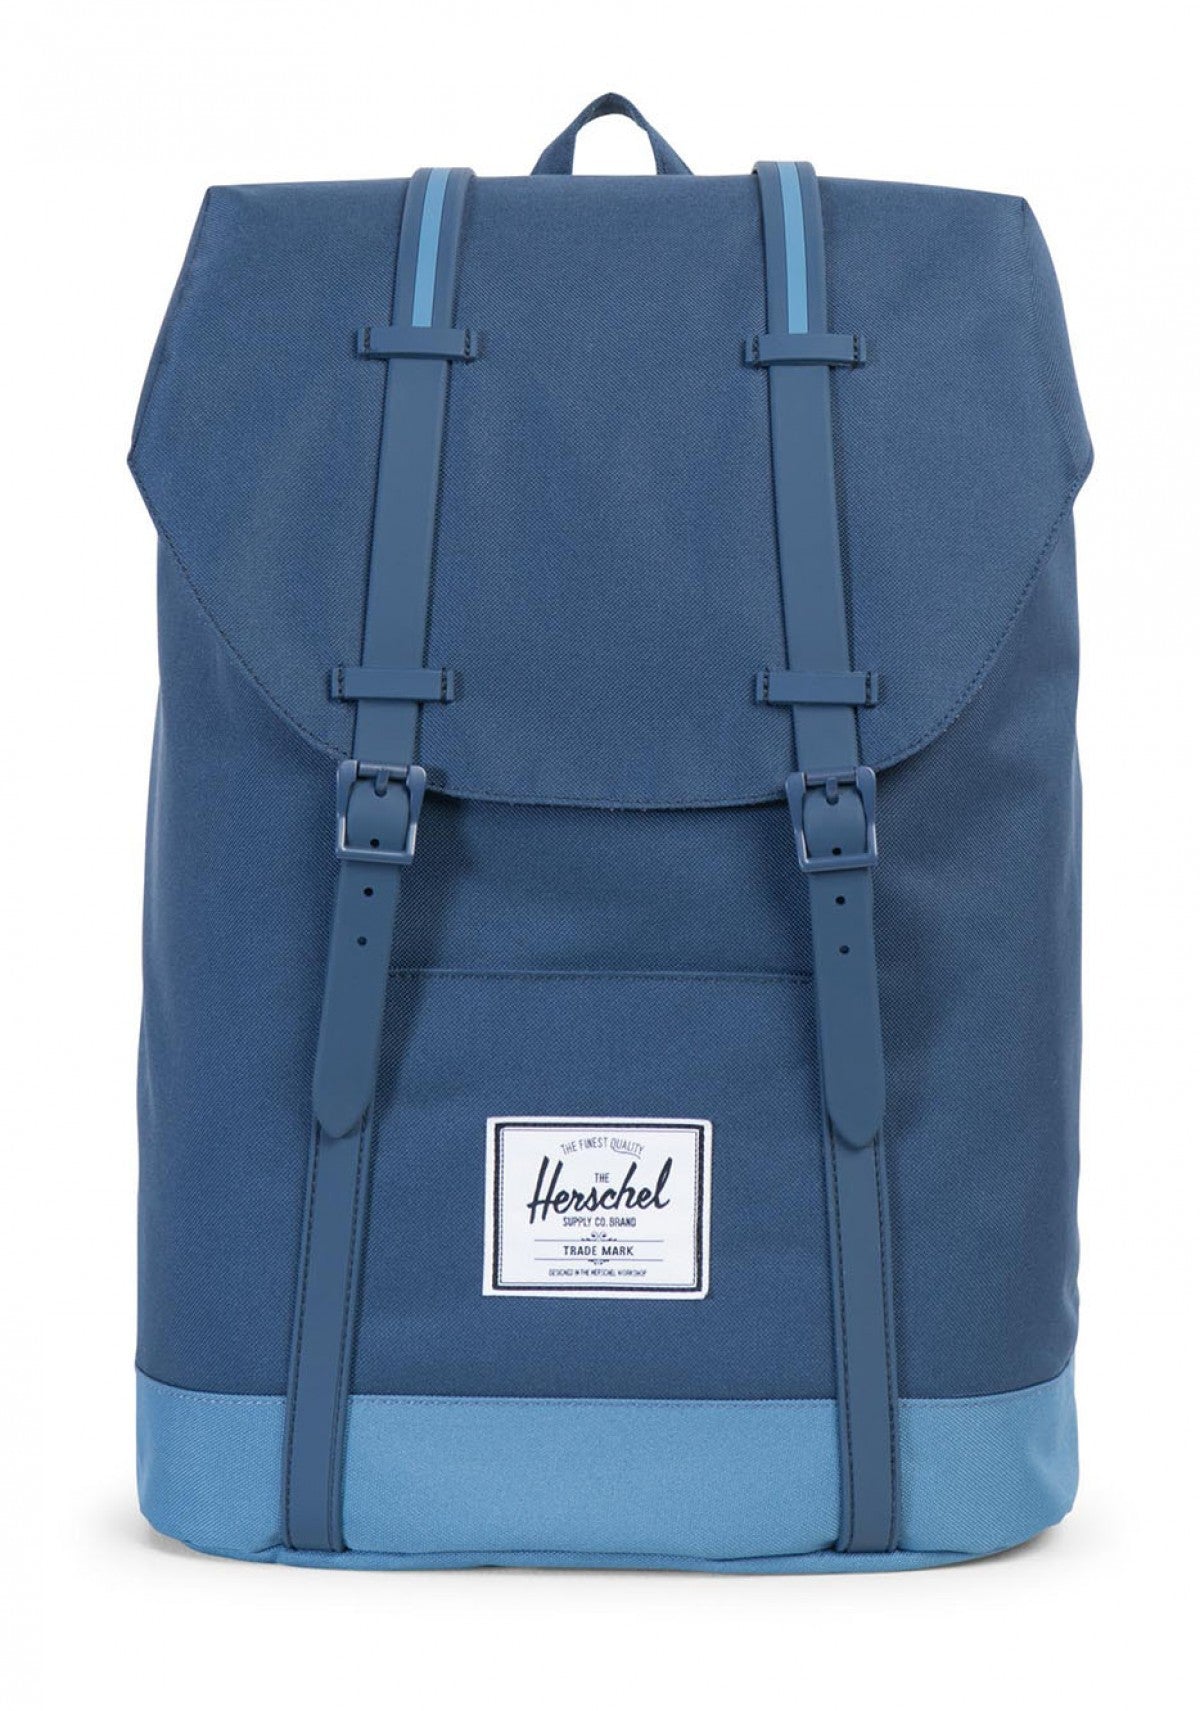 Herschel Supply Co. - Retreat Backpack, Navy/Captain Blue - The Giant Peach